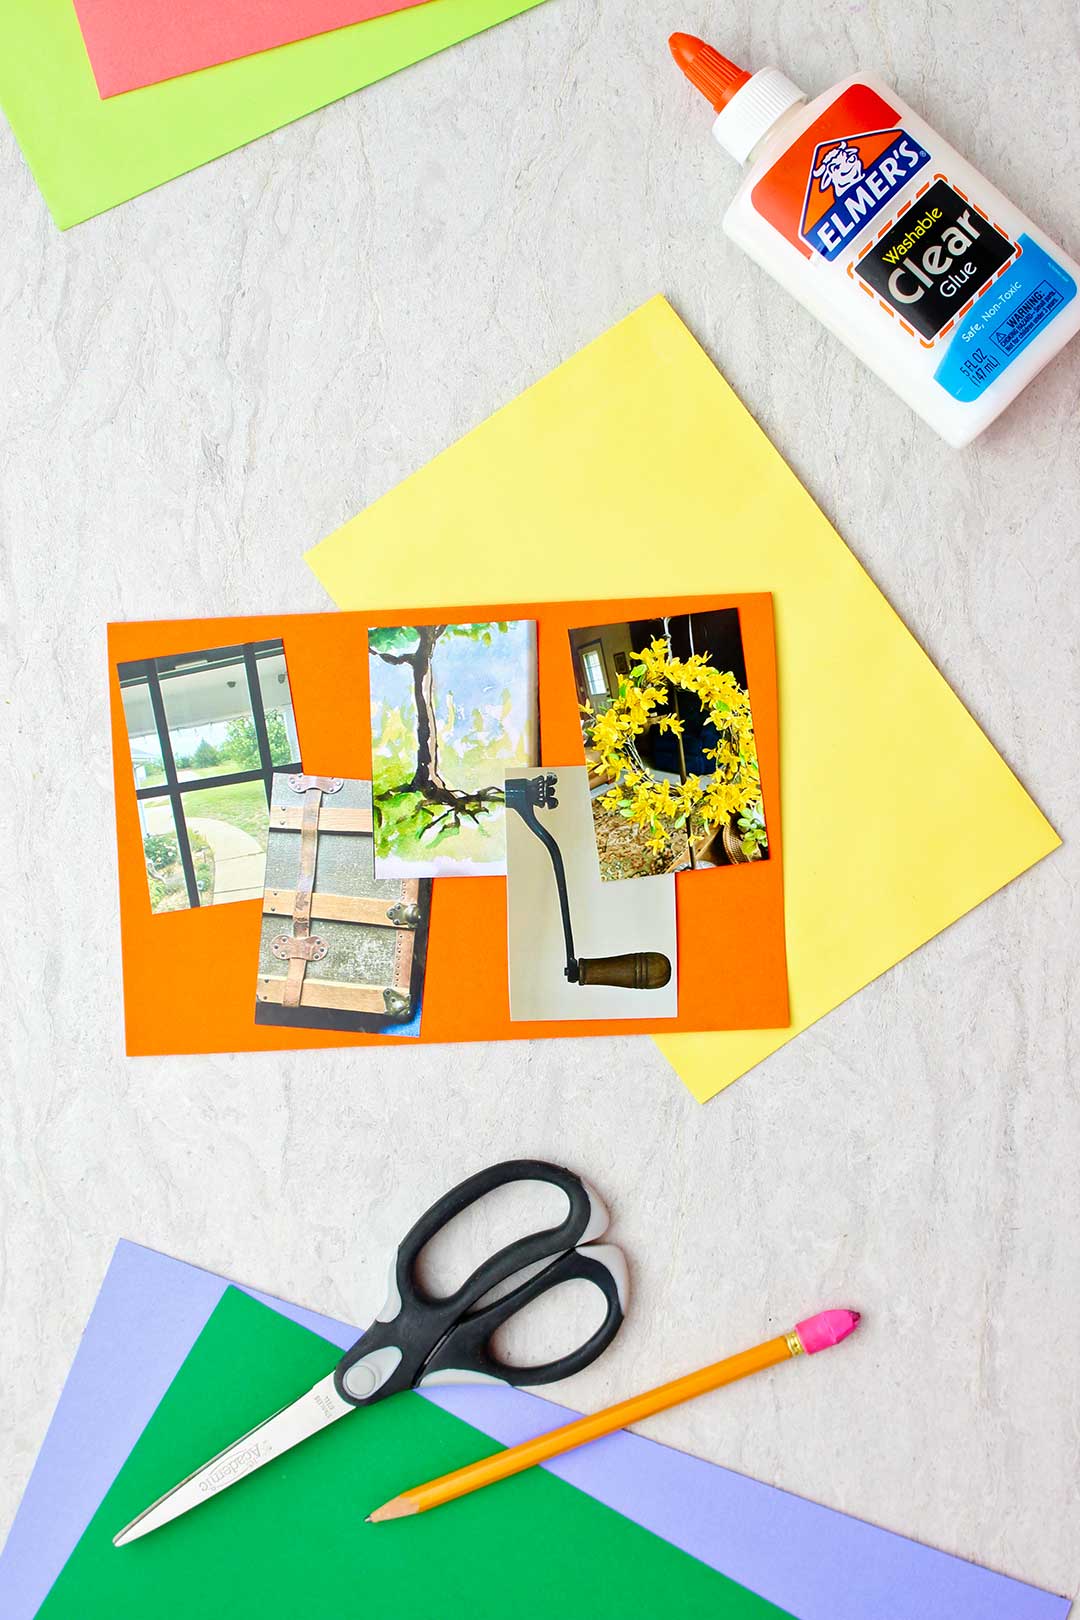 Photo letters spelling "Hello" on orange paper with other supplies near by.